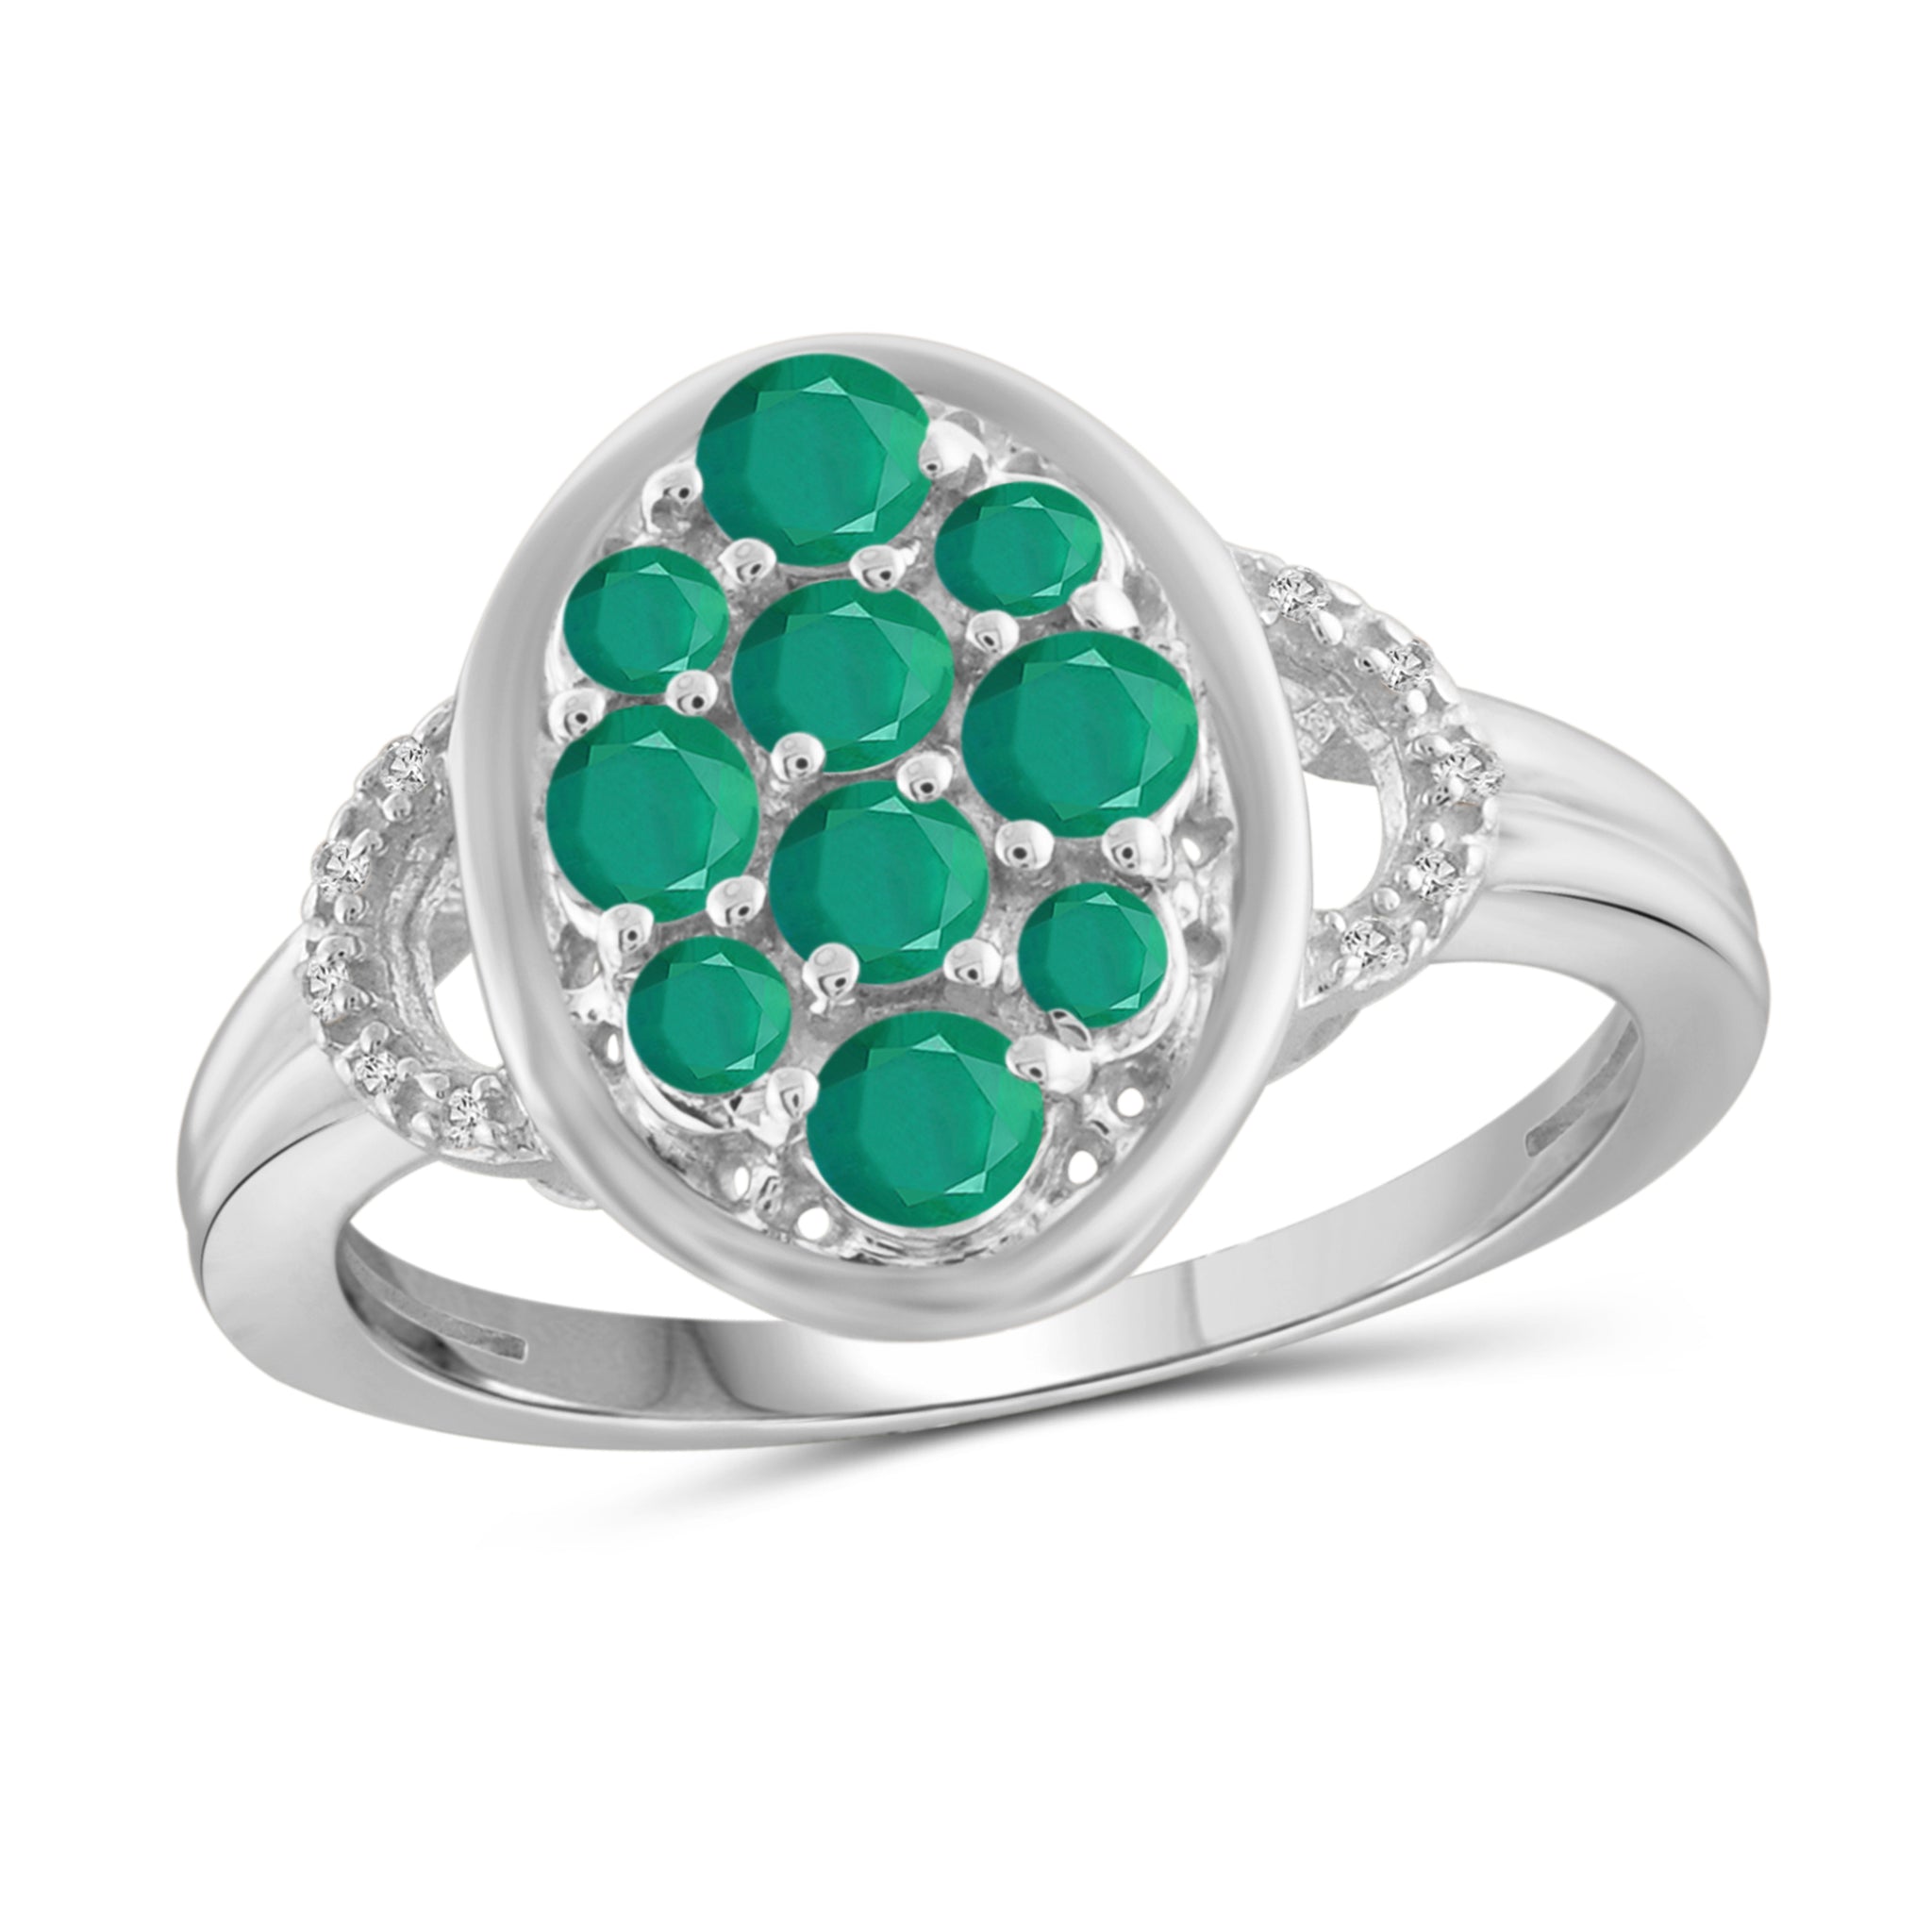 JewelonFire 0.85 Carat T.G.W. Emerald And 1/20 Carat T.W. White Diamond Sterling Silver Ring - Assorted Colors